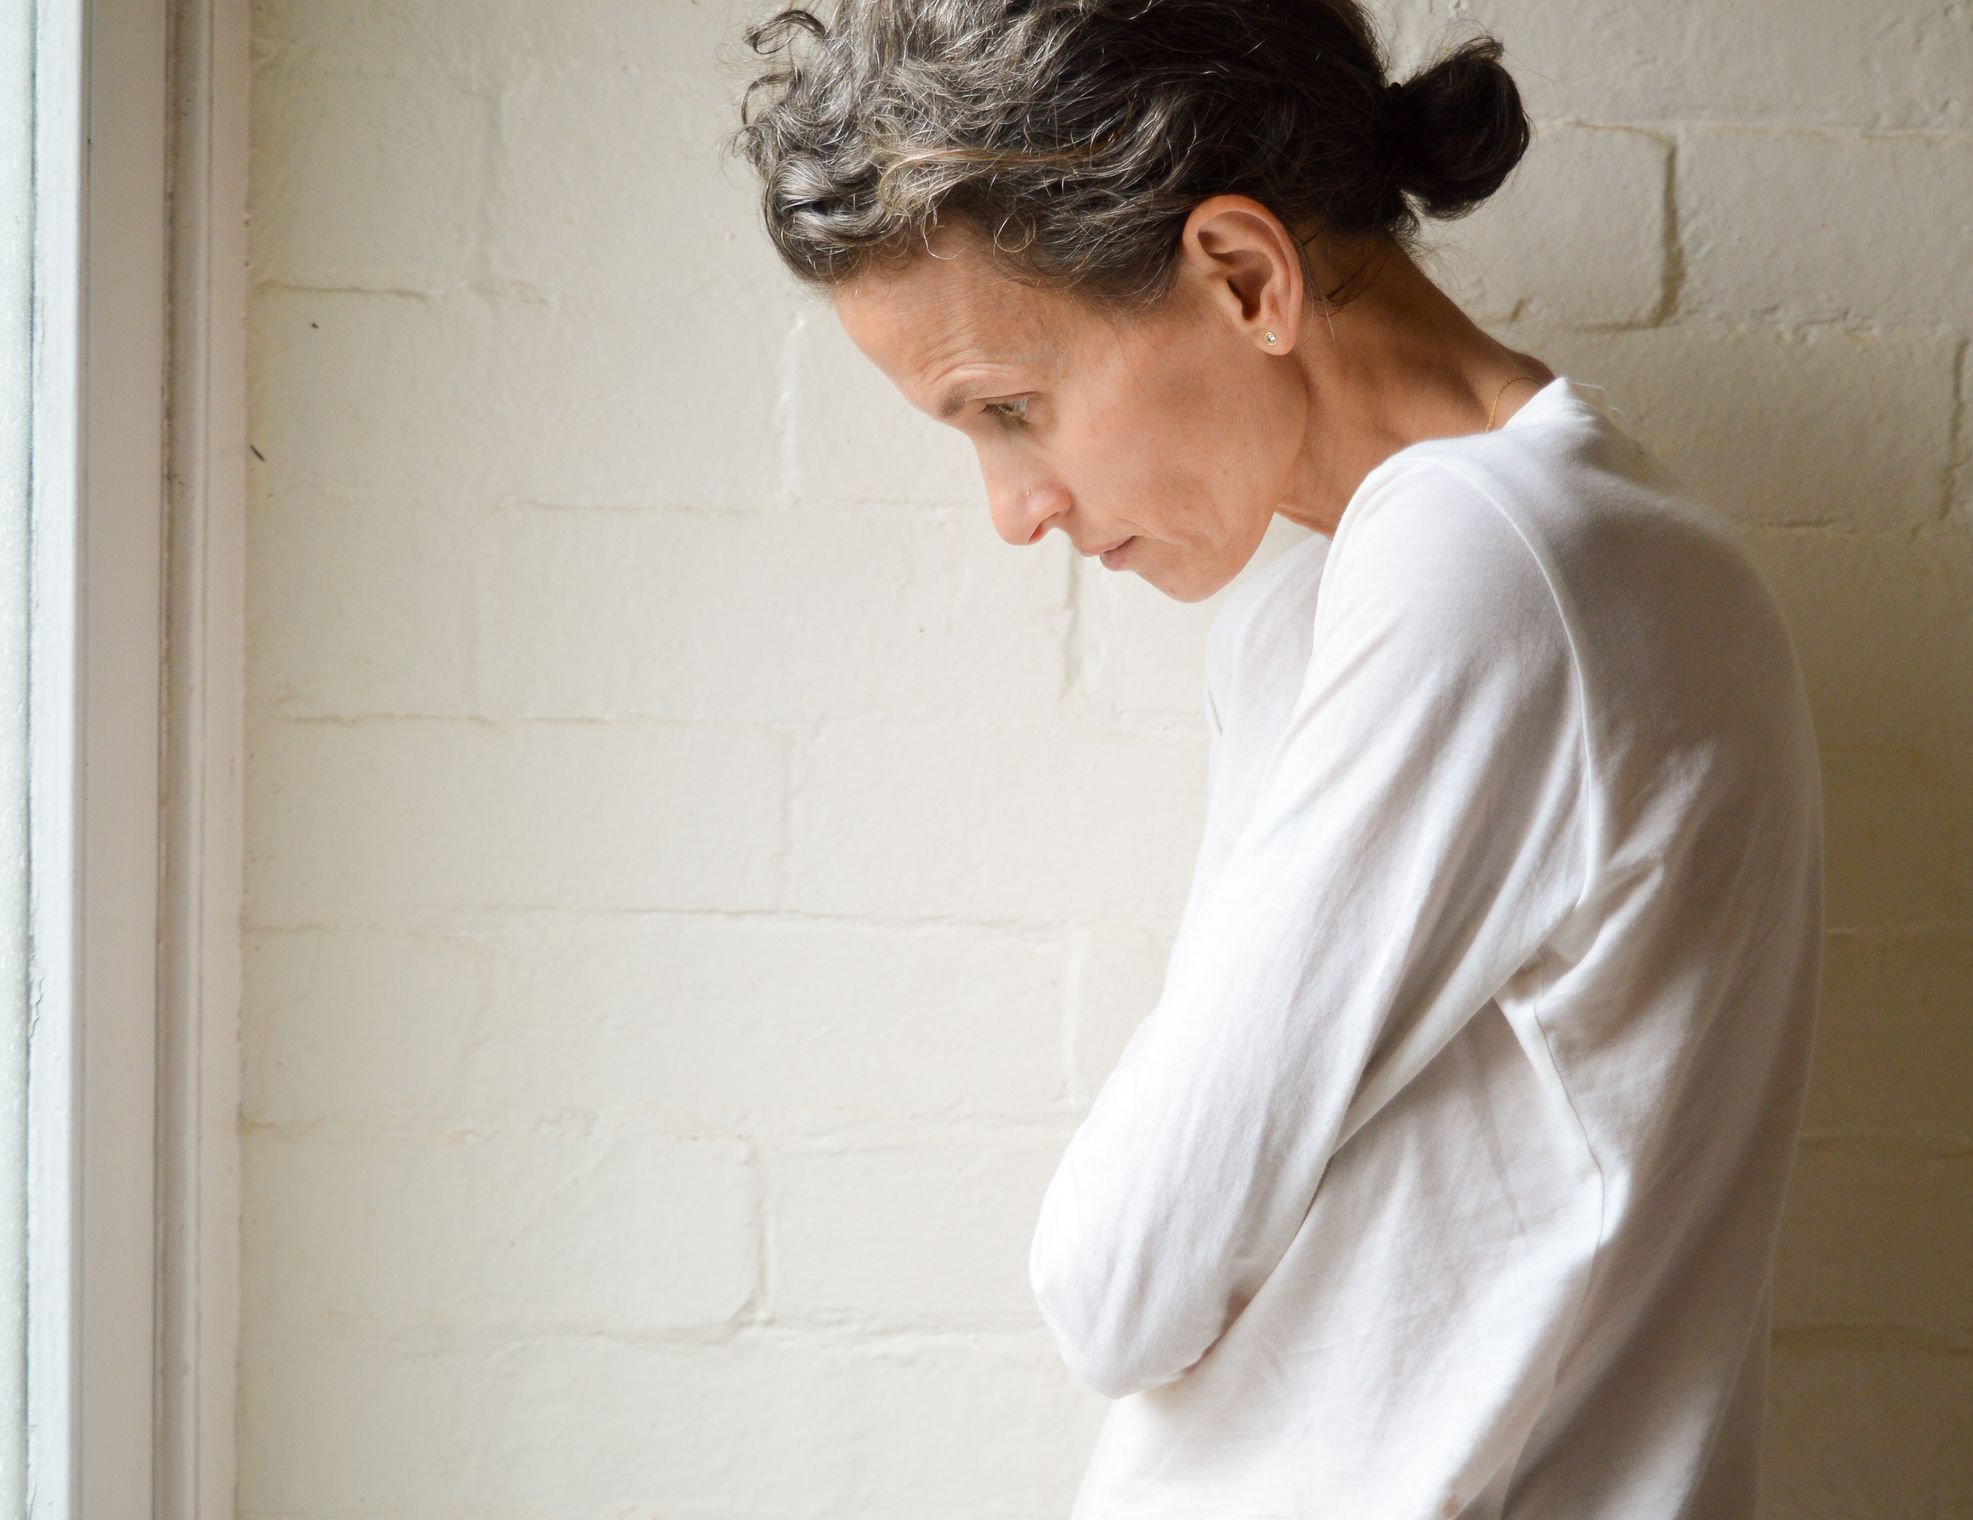 Menopause and Eating Disorders